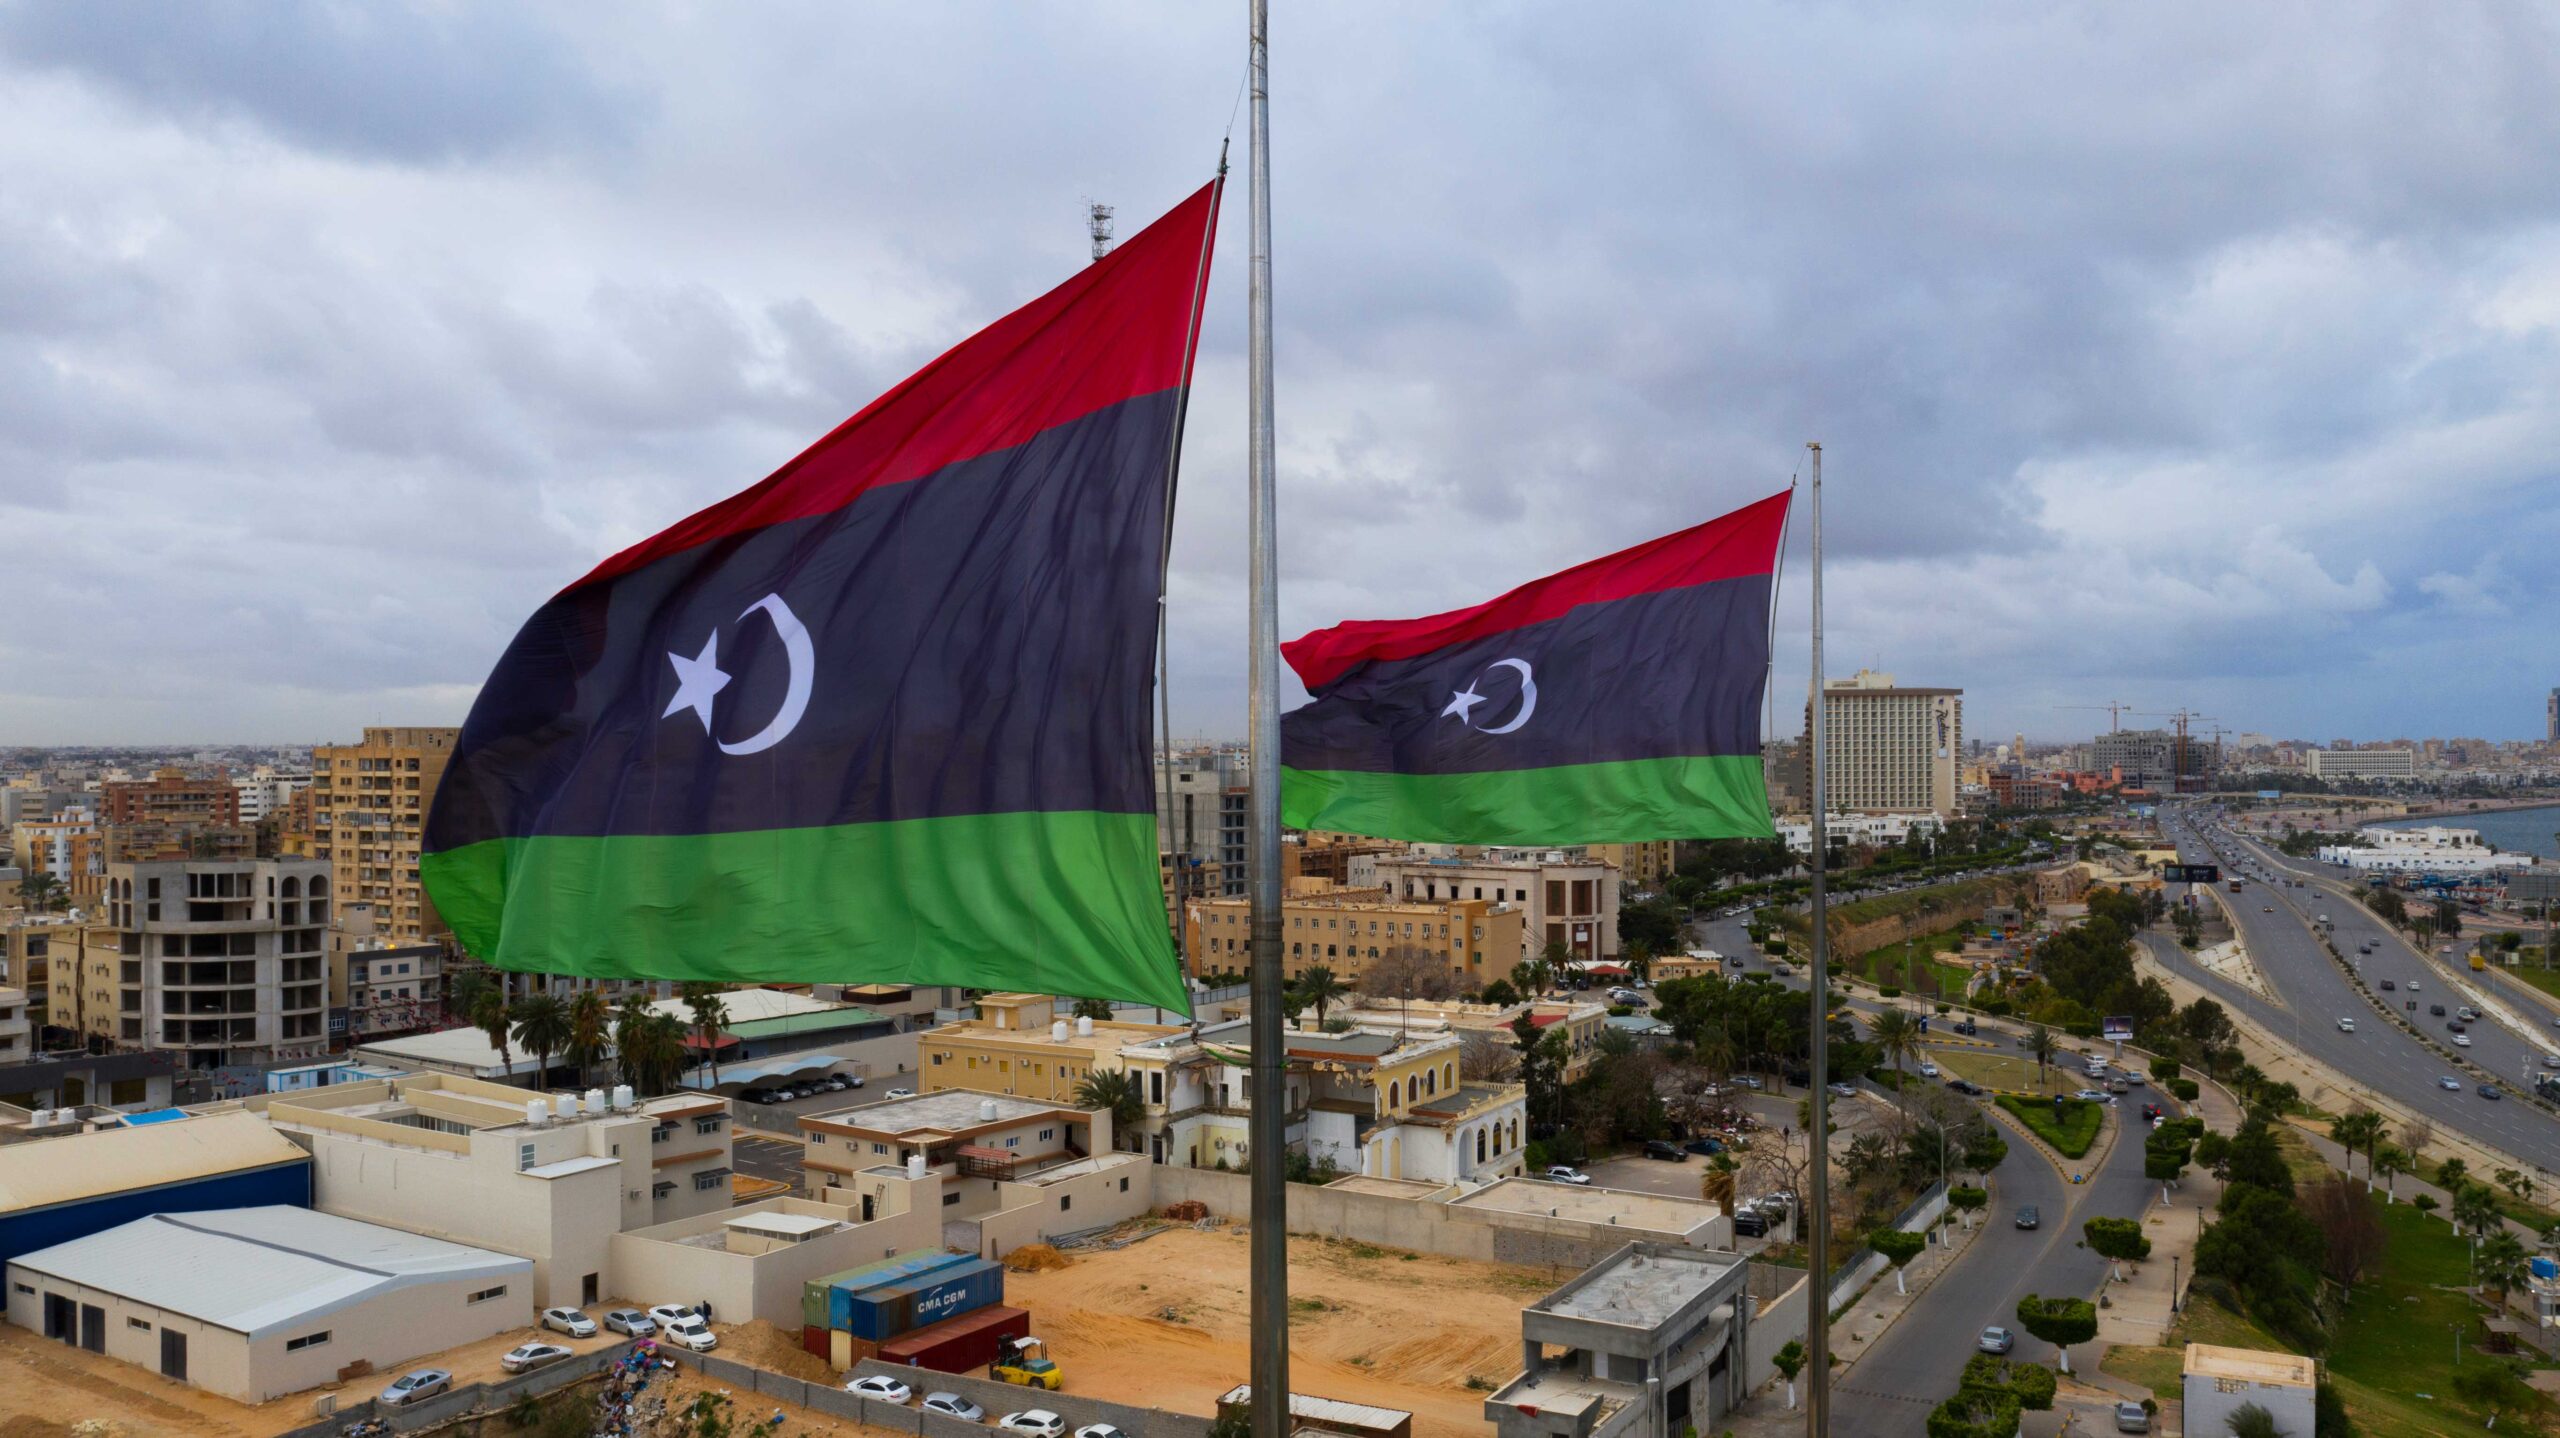 Youth Activism in Libya since 2011: Reflections & Challenges